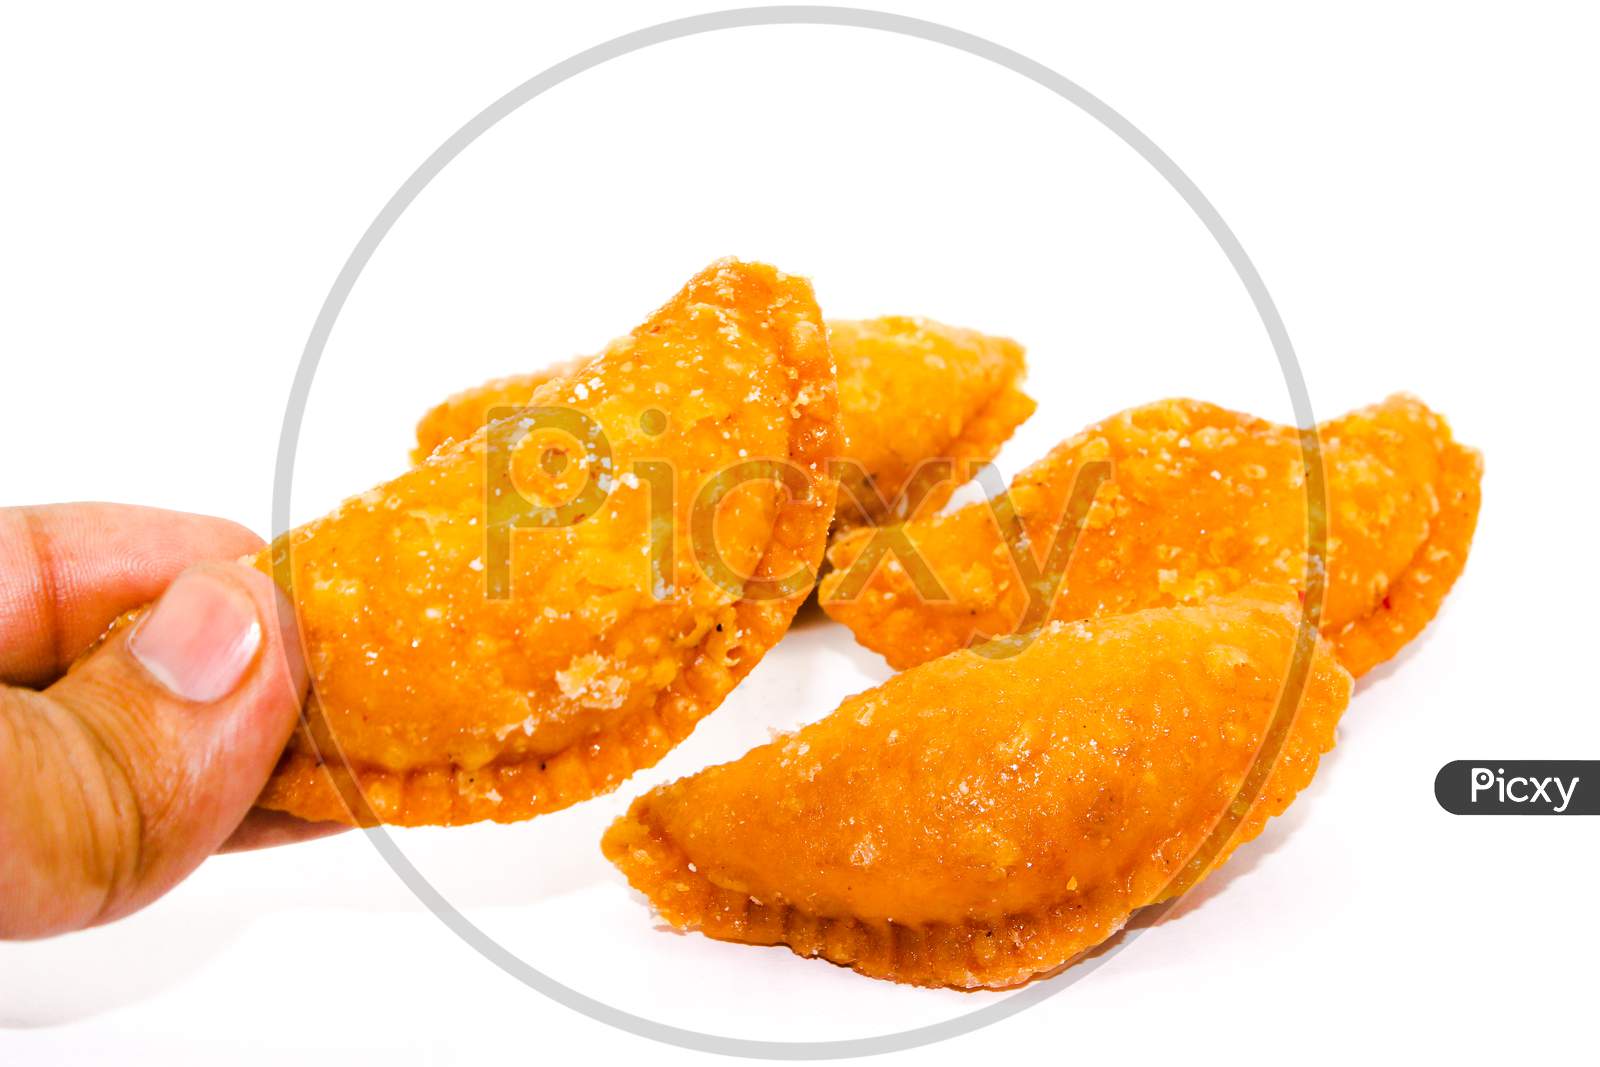 Gujiya On White Background With Selective Focus